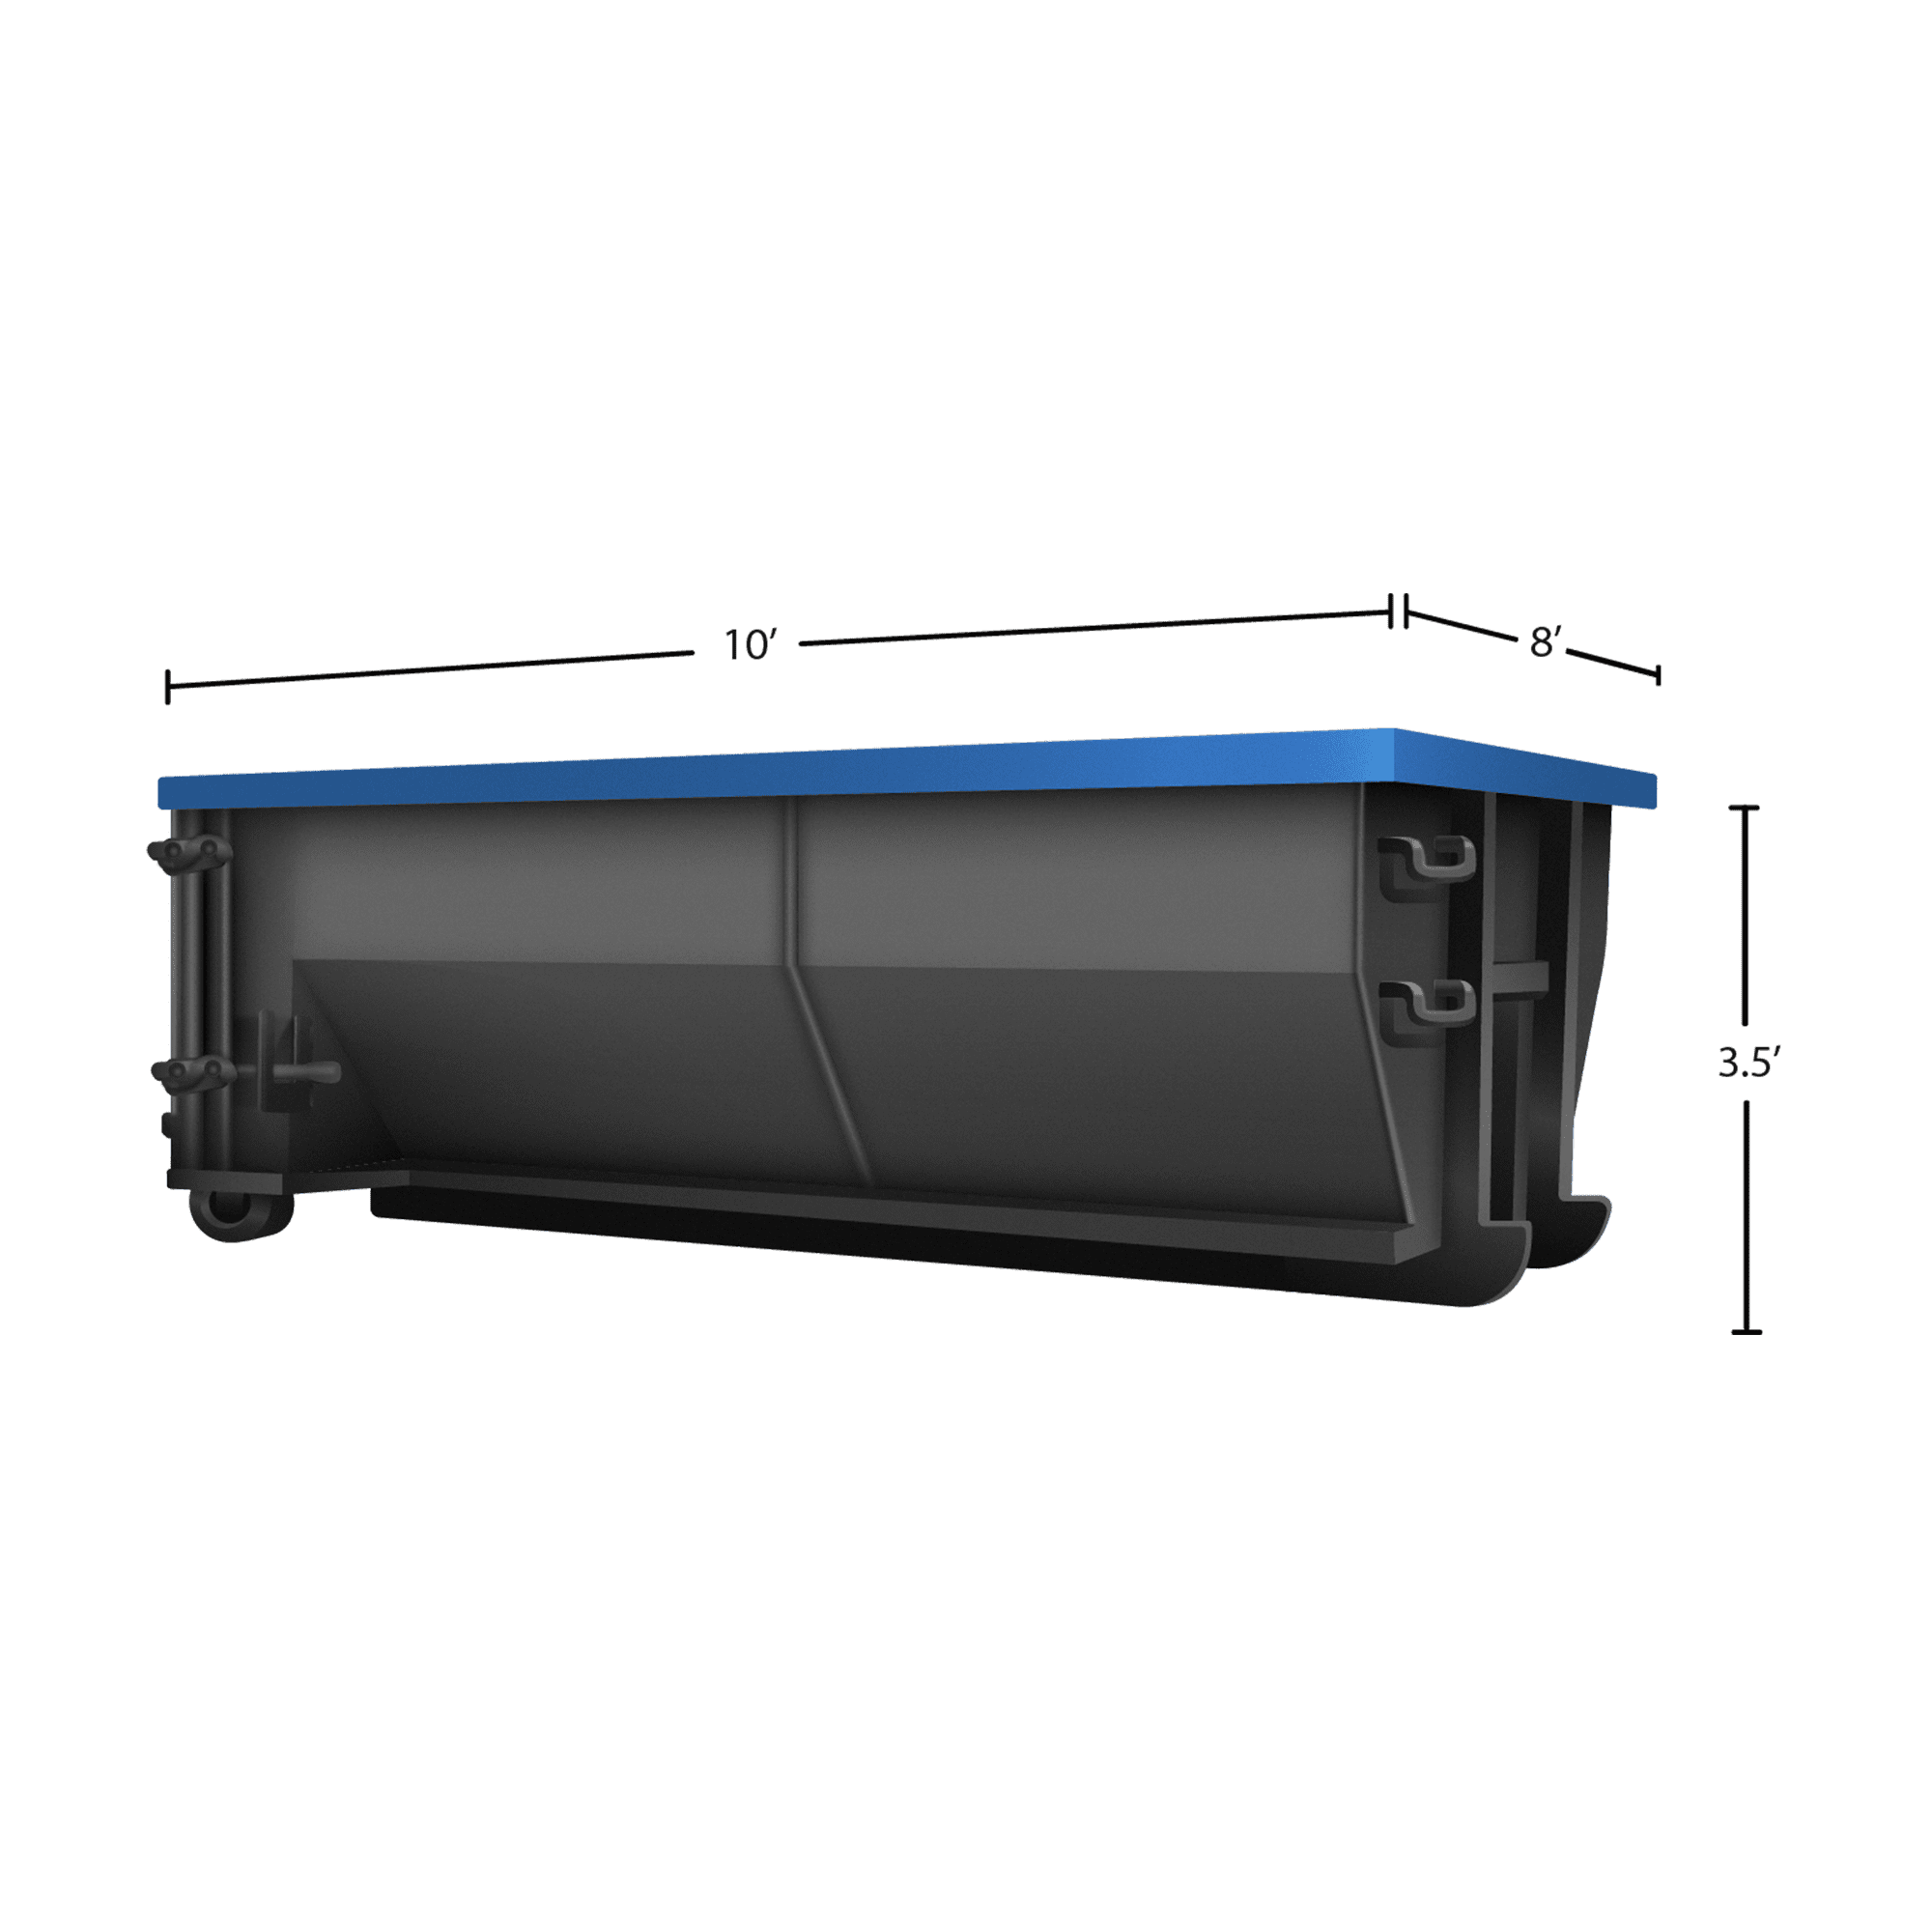 Black dumpster with blue trim, and dimensions of the unit (10' L x 8' W x 3.5' H)